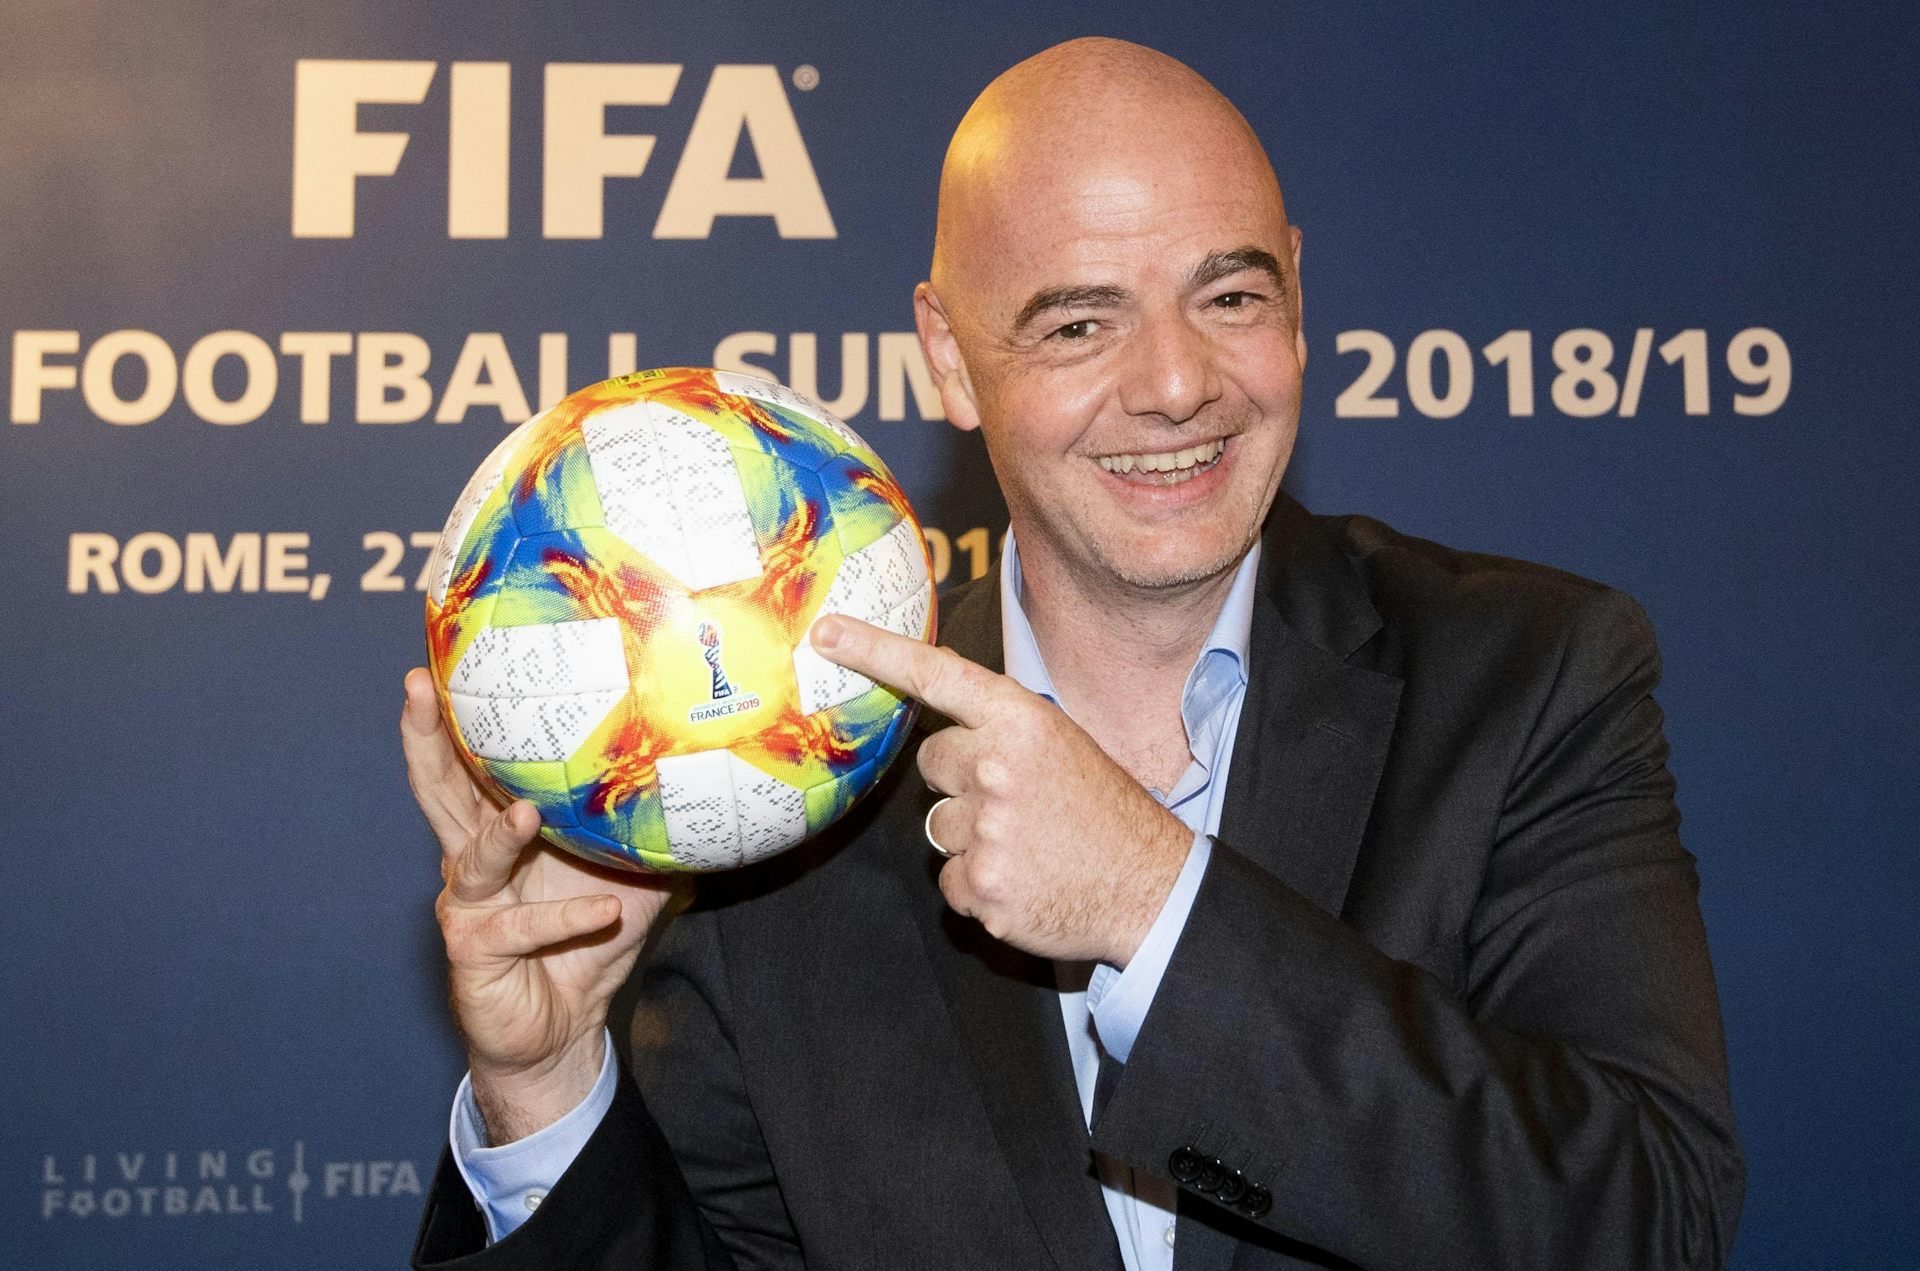 World Cup 2022 plan to expand to 48 countries exposes footballs regional fault lines